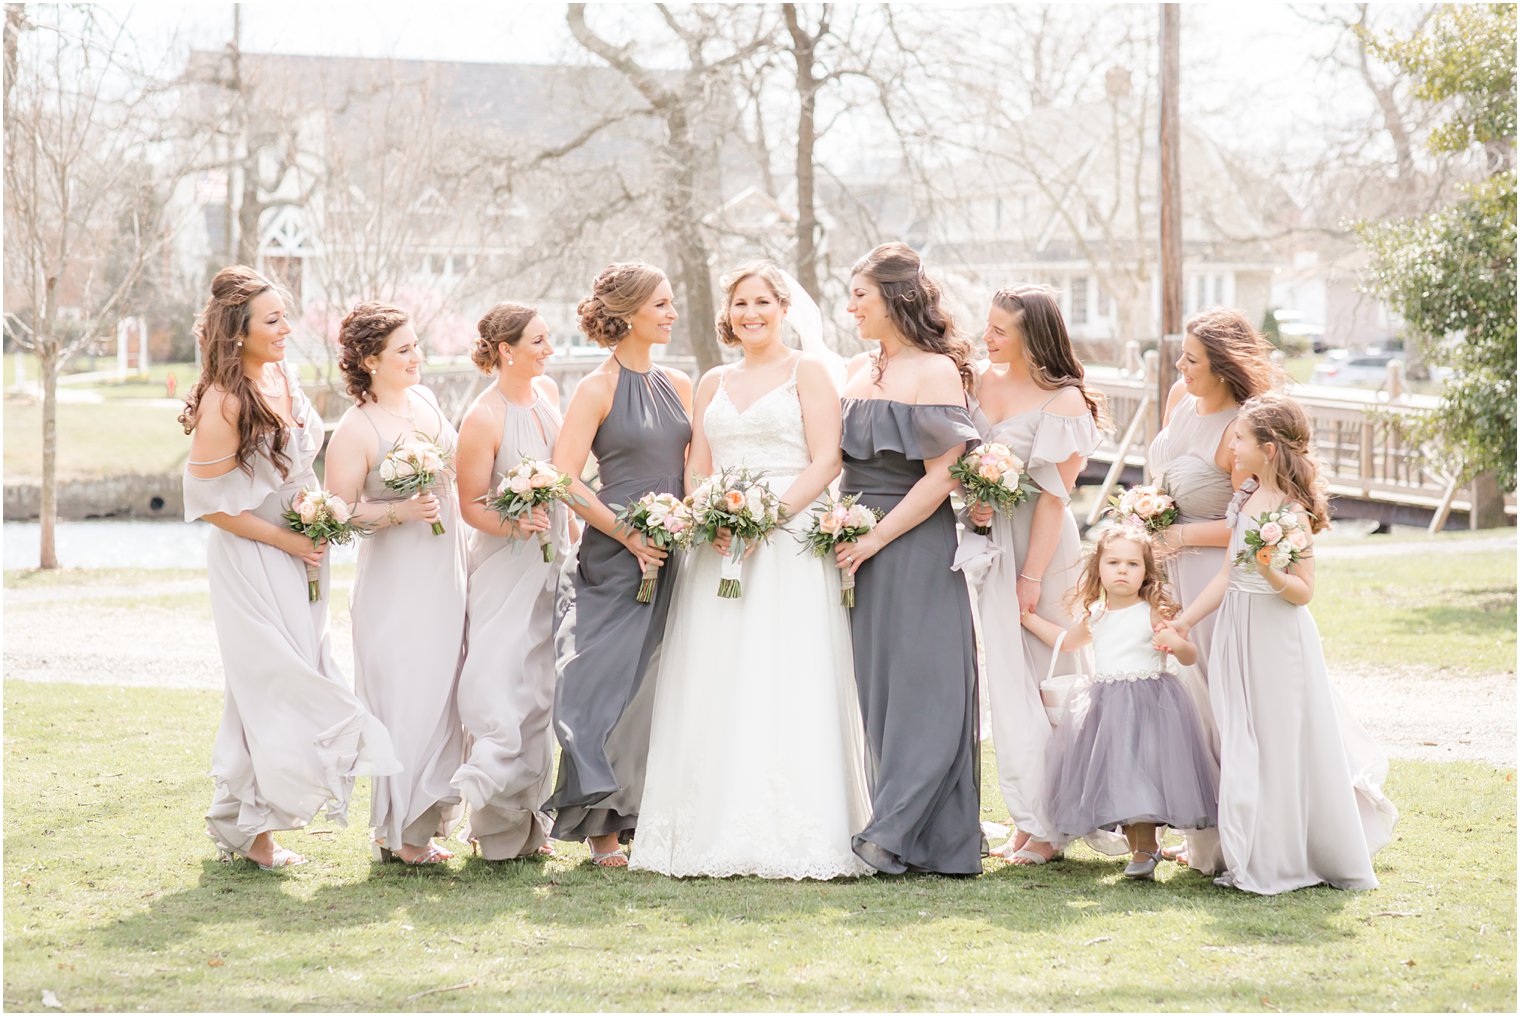 Bridesmaids wearing dresses in shades of gray